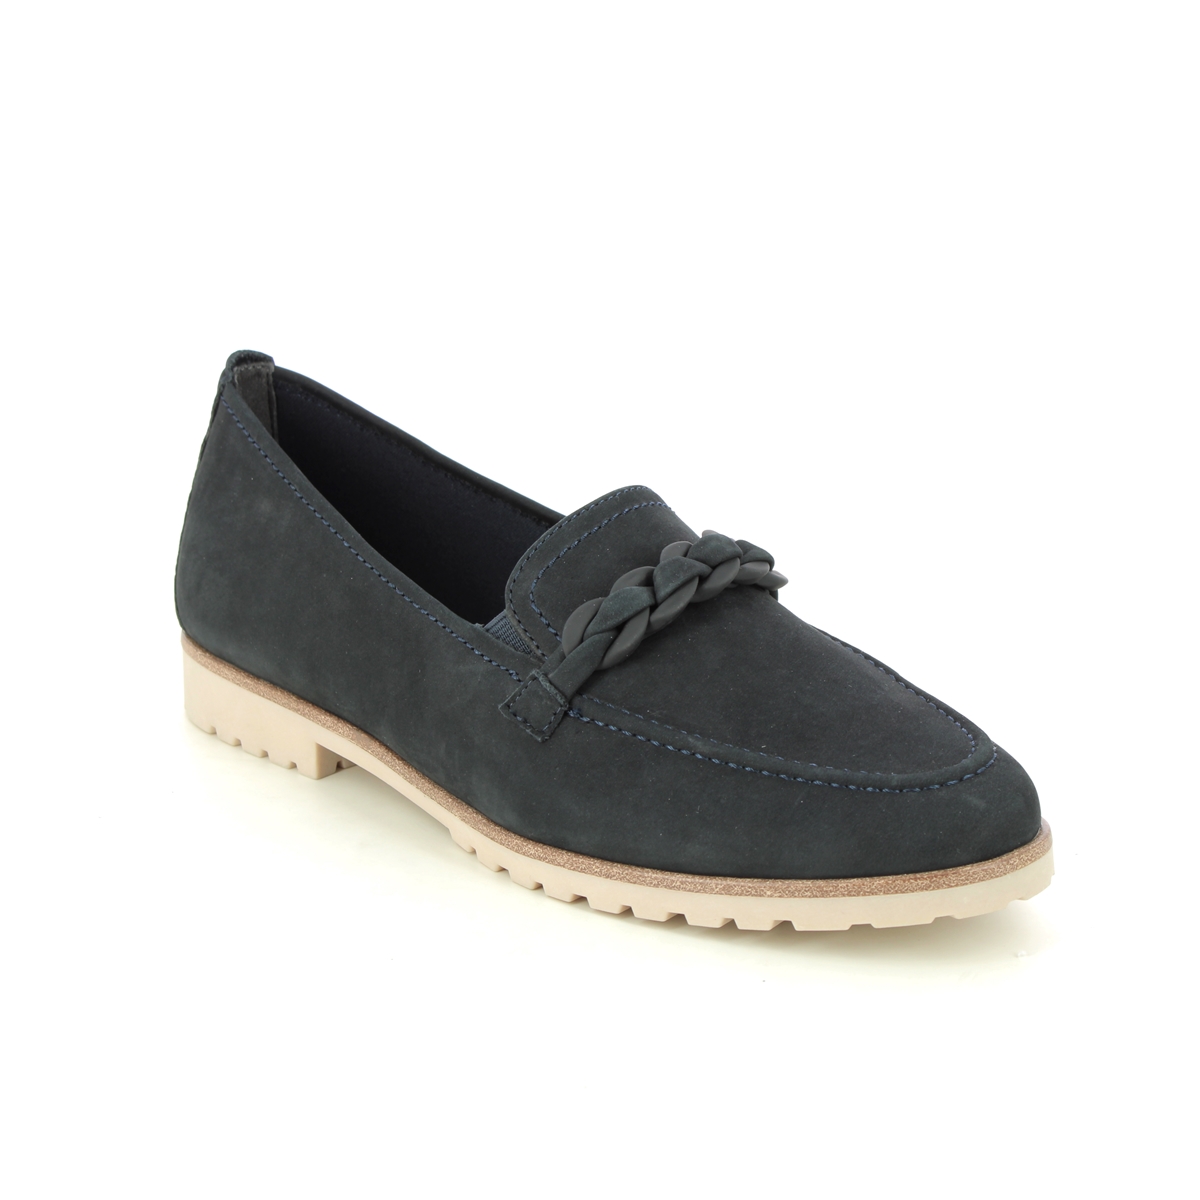 Tamaris Careen Loafer Navy Nubuck Womens Loafers 24200-20-805 In Size 38 In Plain Navy Nubuck